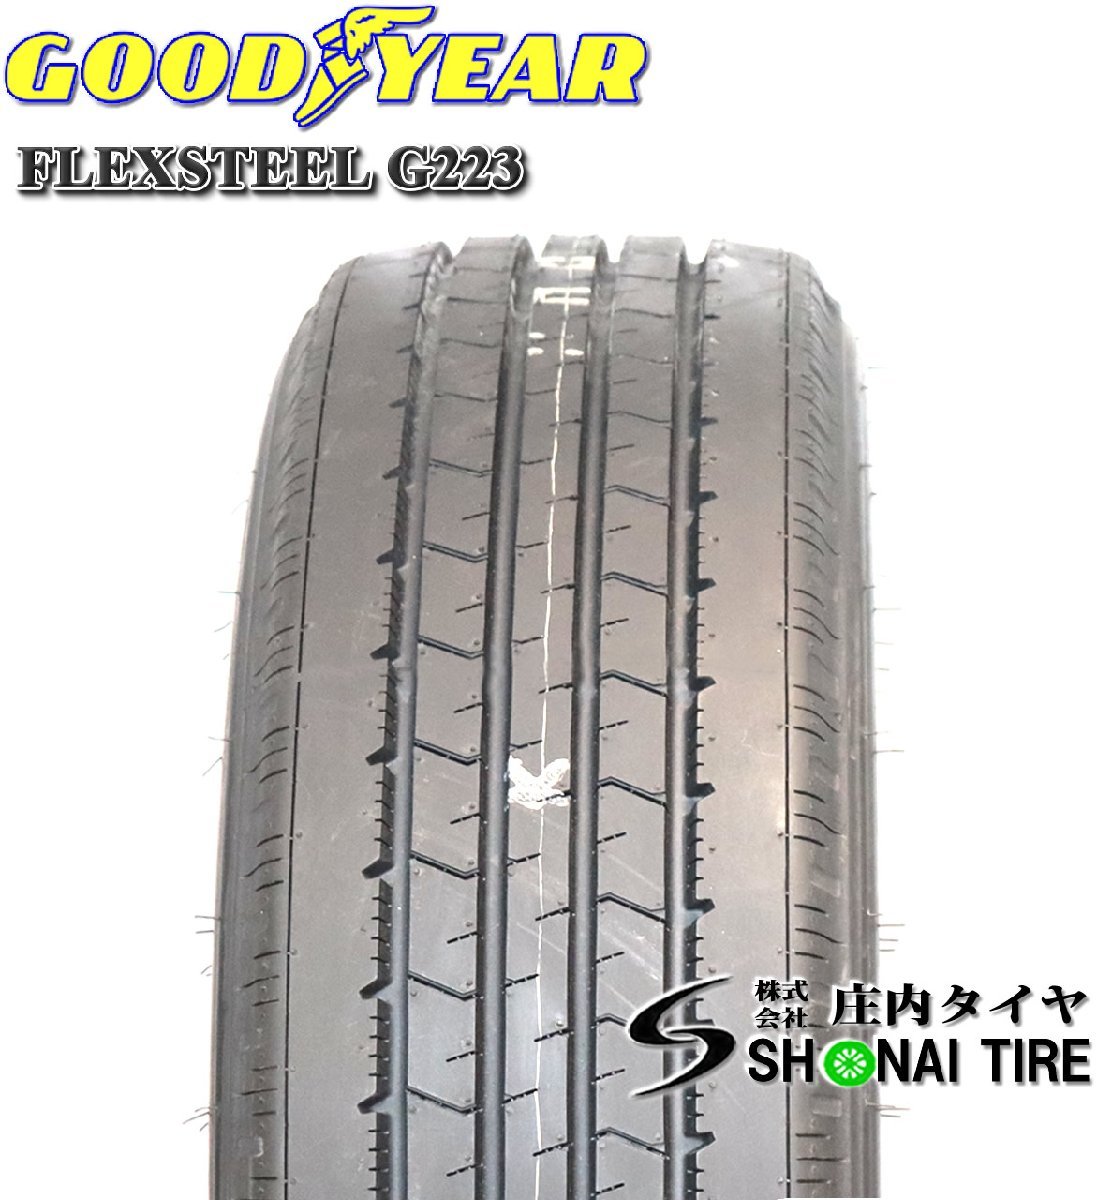  stock necessary verification Canter for Goodyear FLEX STEEL G223 205/80R17.5 LT iron wheel attaching 17.5×5.25 +115 2 ps price summer NO,GY011SH010-2